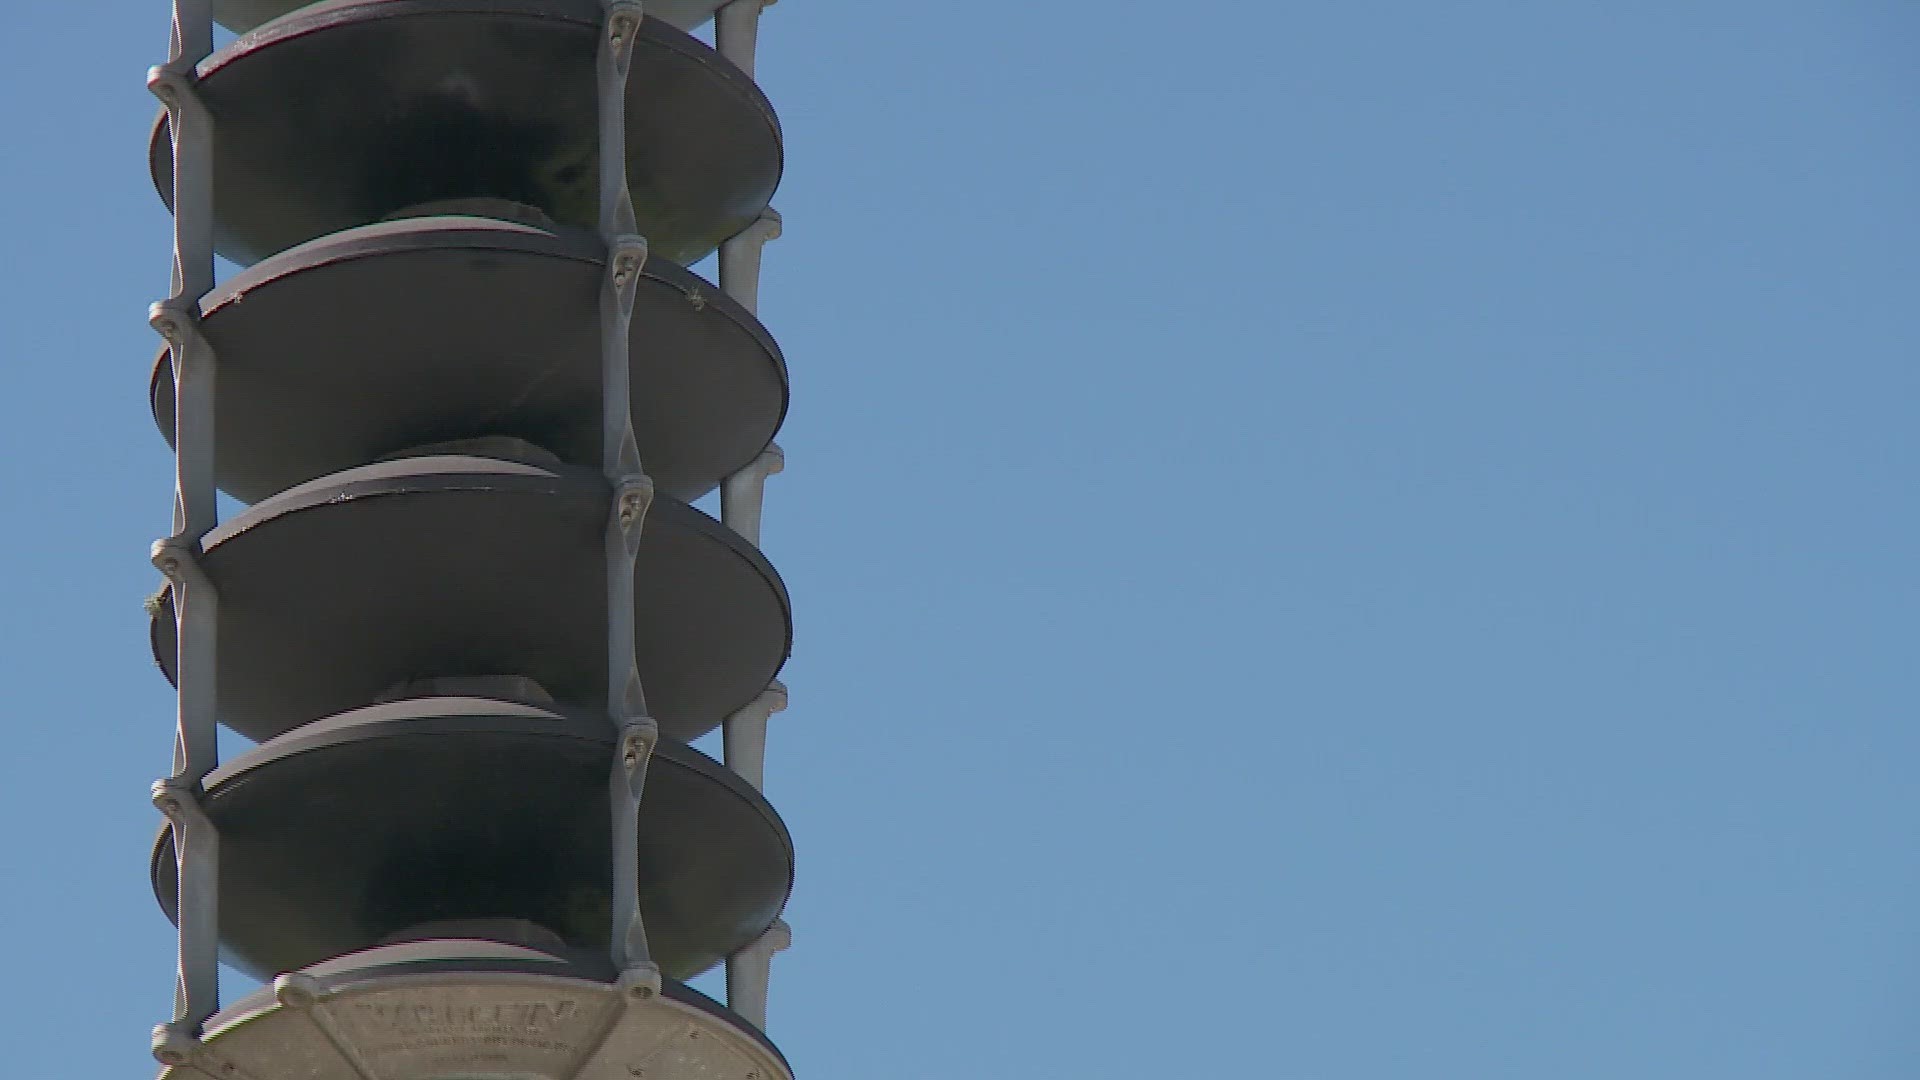 St. Charles Parish residents say they heard the warning sirens go off.